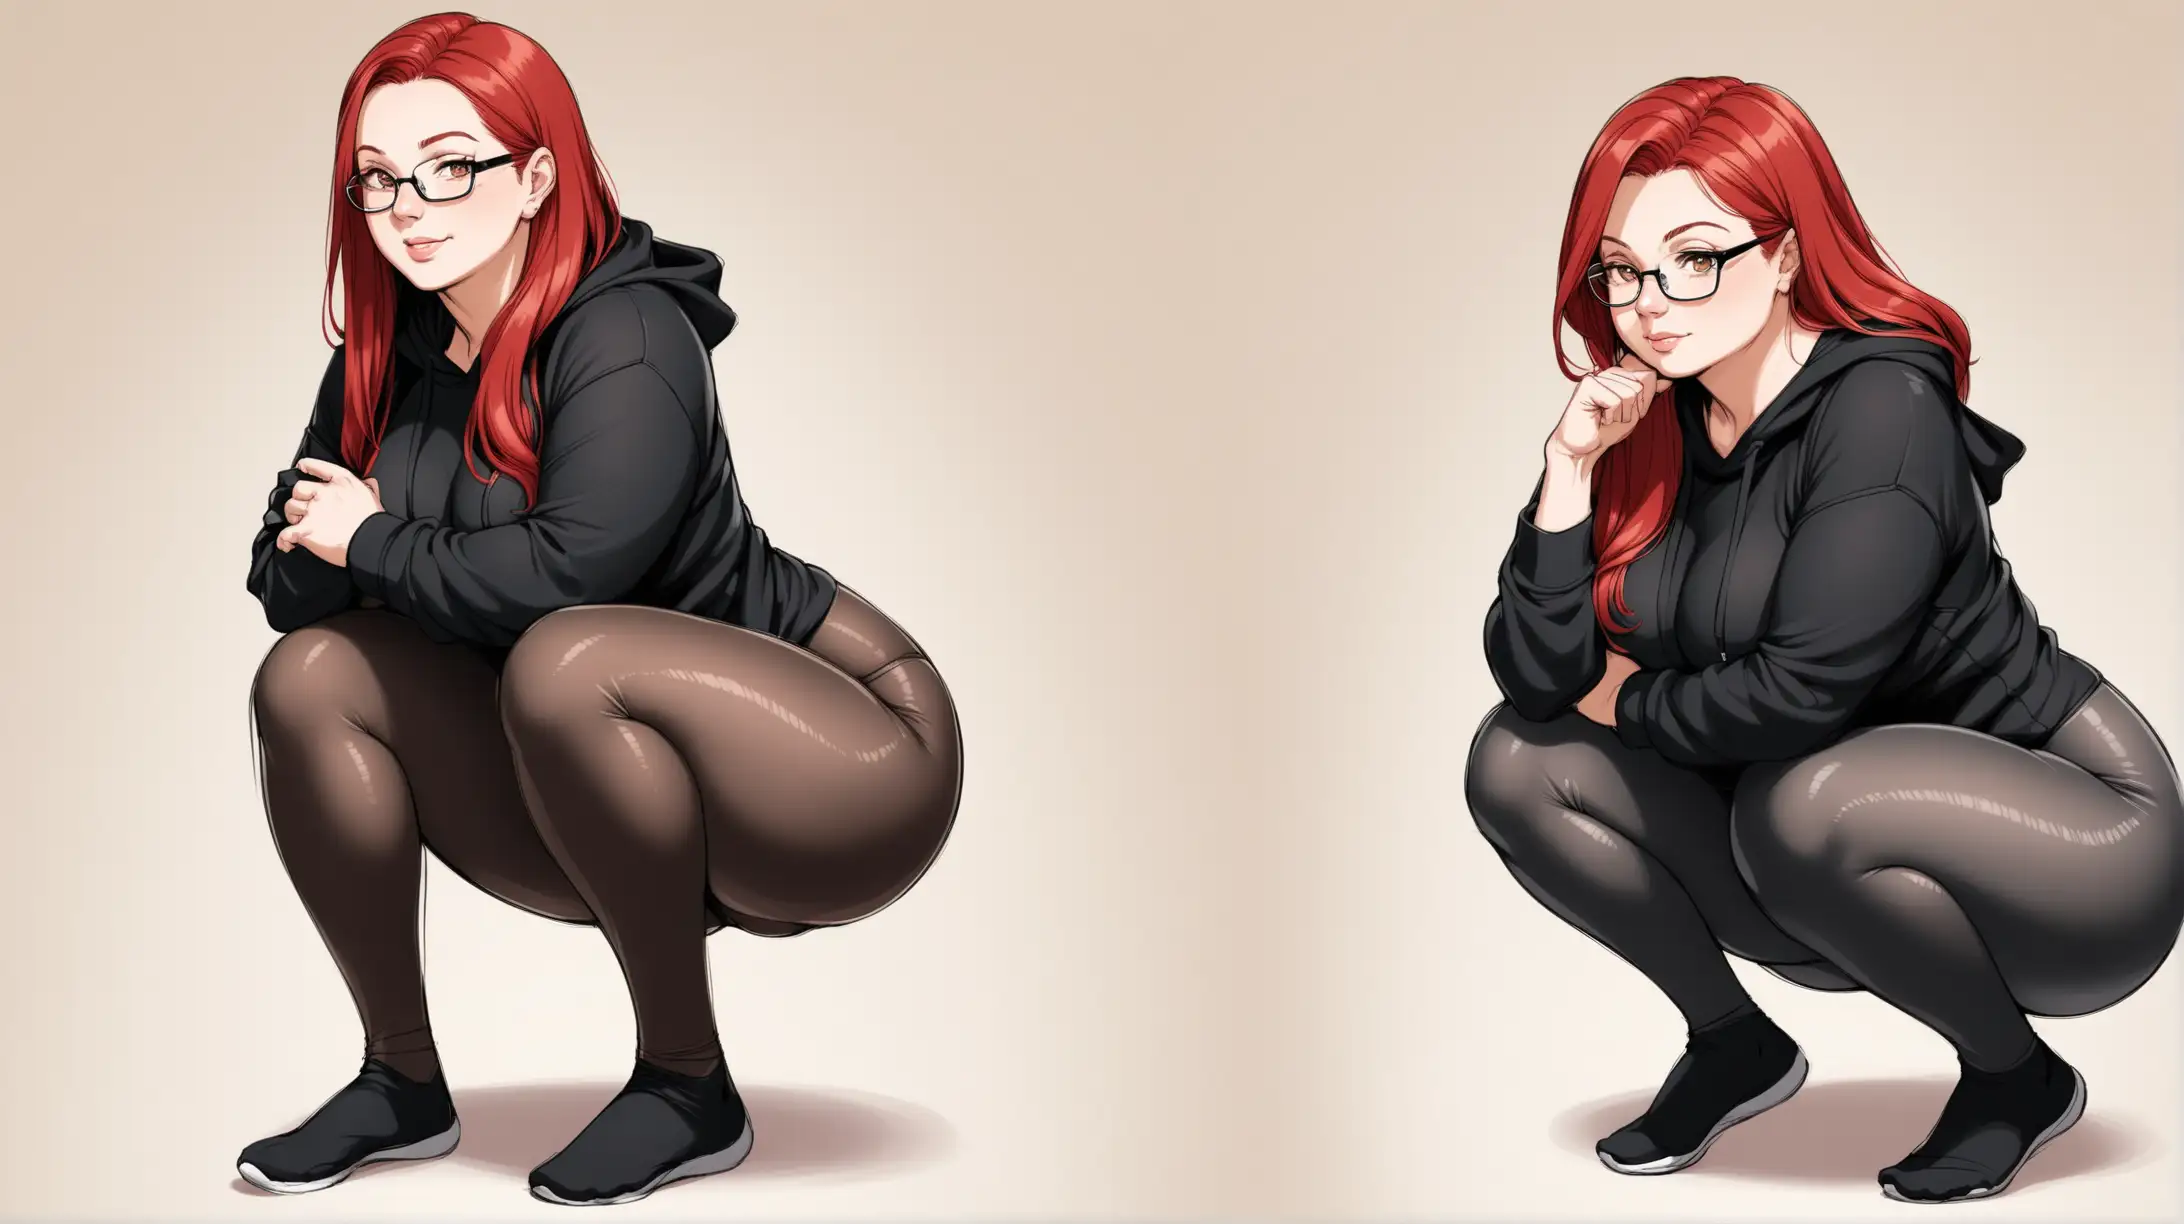 Curvy, Mature, Red Haired Woman, Glasses, wearing a full Black Leotard, Gray Pantyhose, squats with her 21 year old daughter, who wears tight black leggings and a hooded sweatshirt